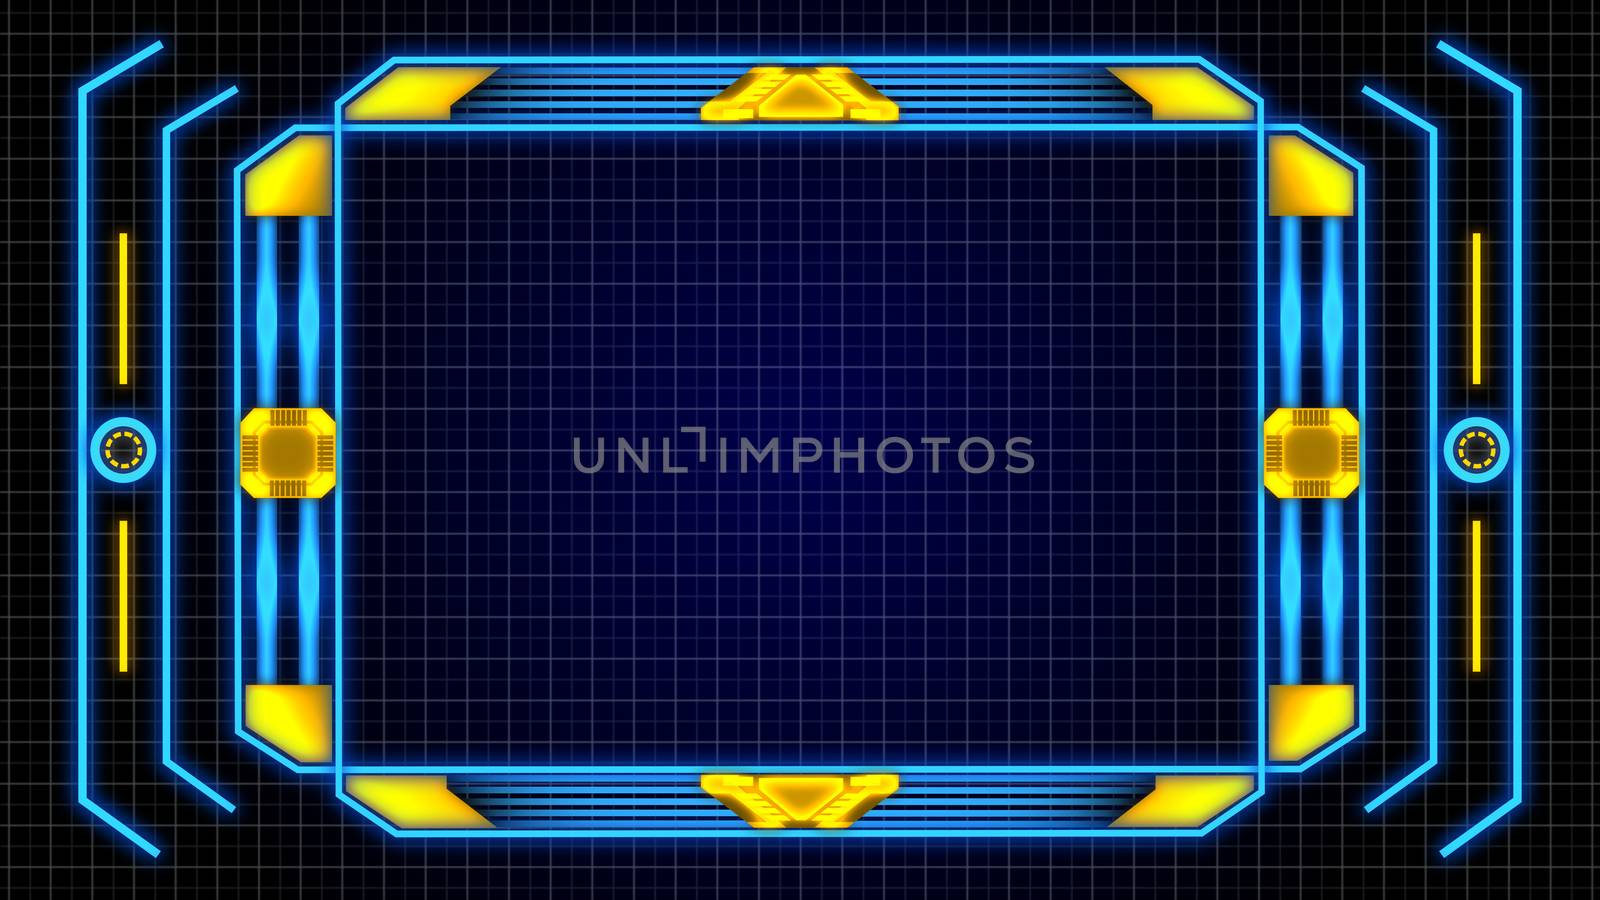 Monitor Screen Border With Orange-Blue Digital Elements Details and Grid Background